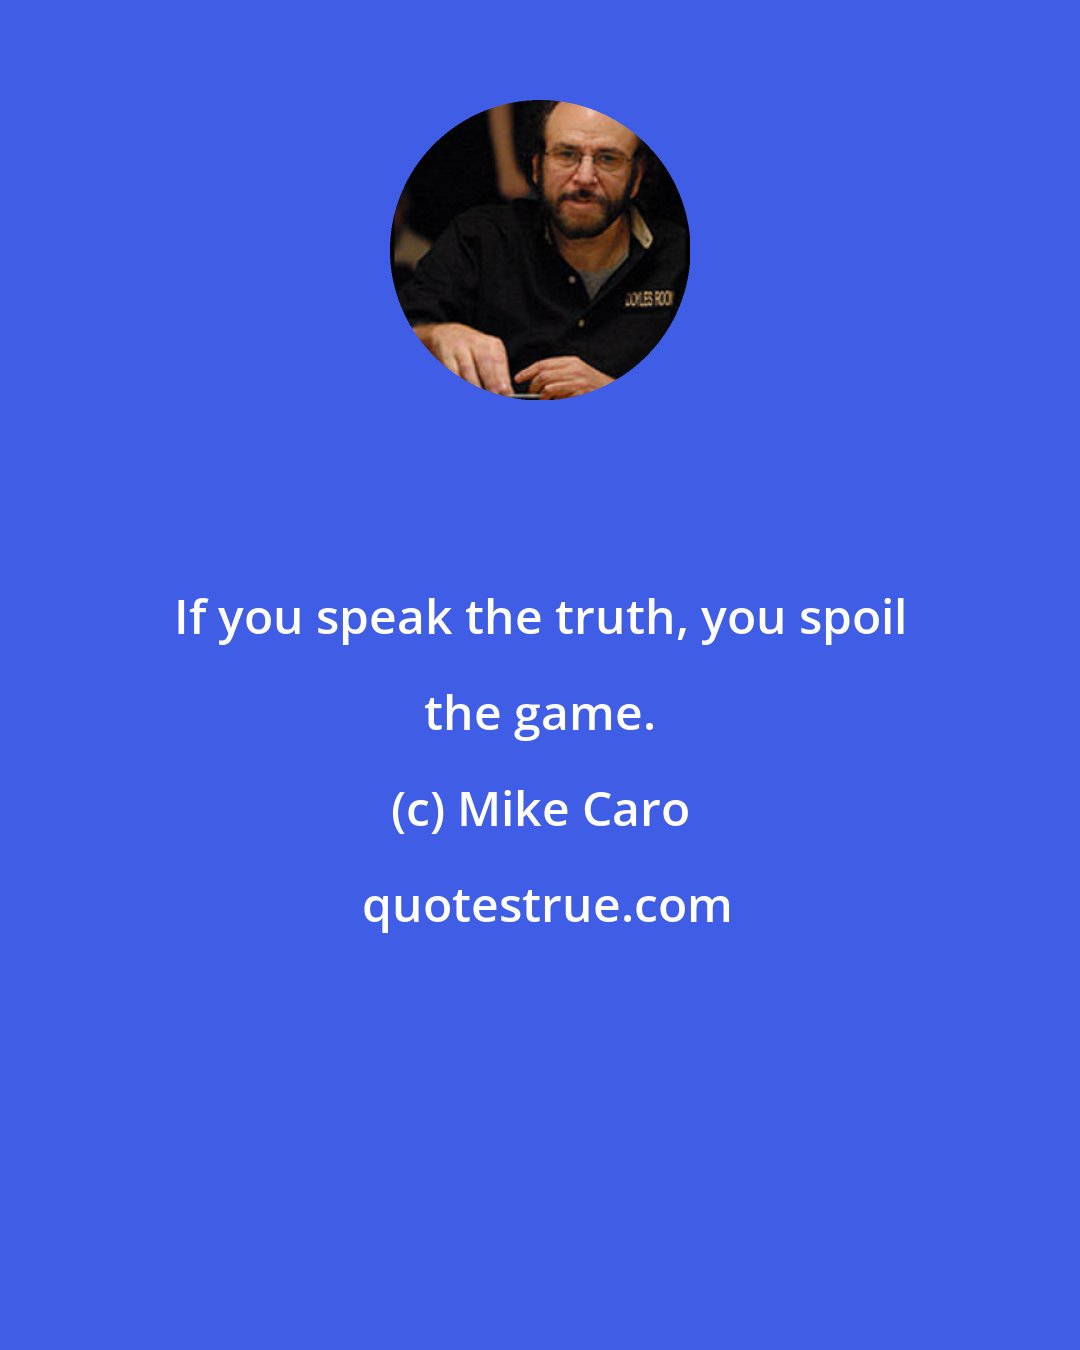 Mike Caro: If you speak the truth, you spoil the game.